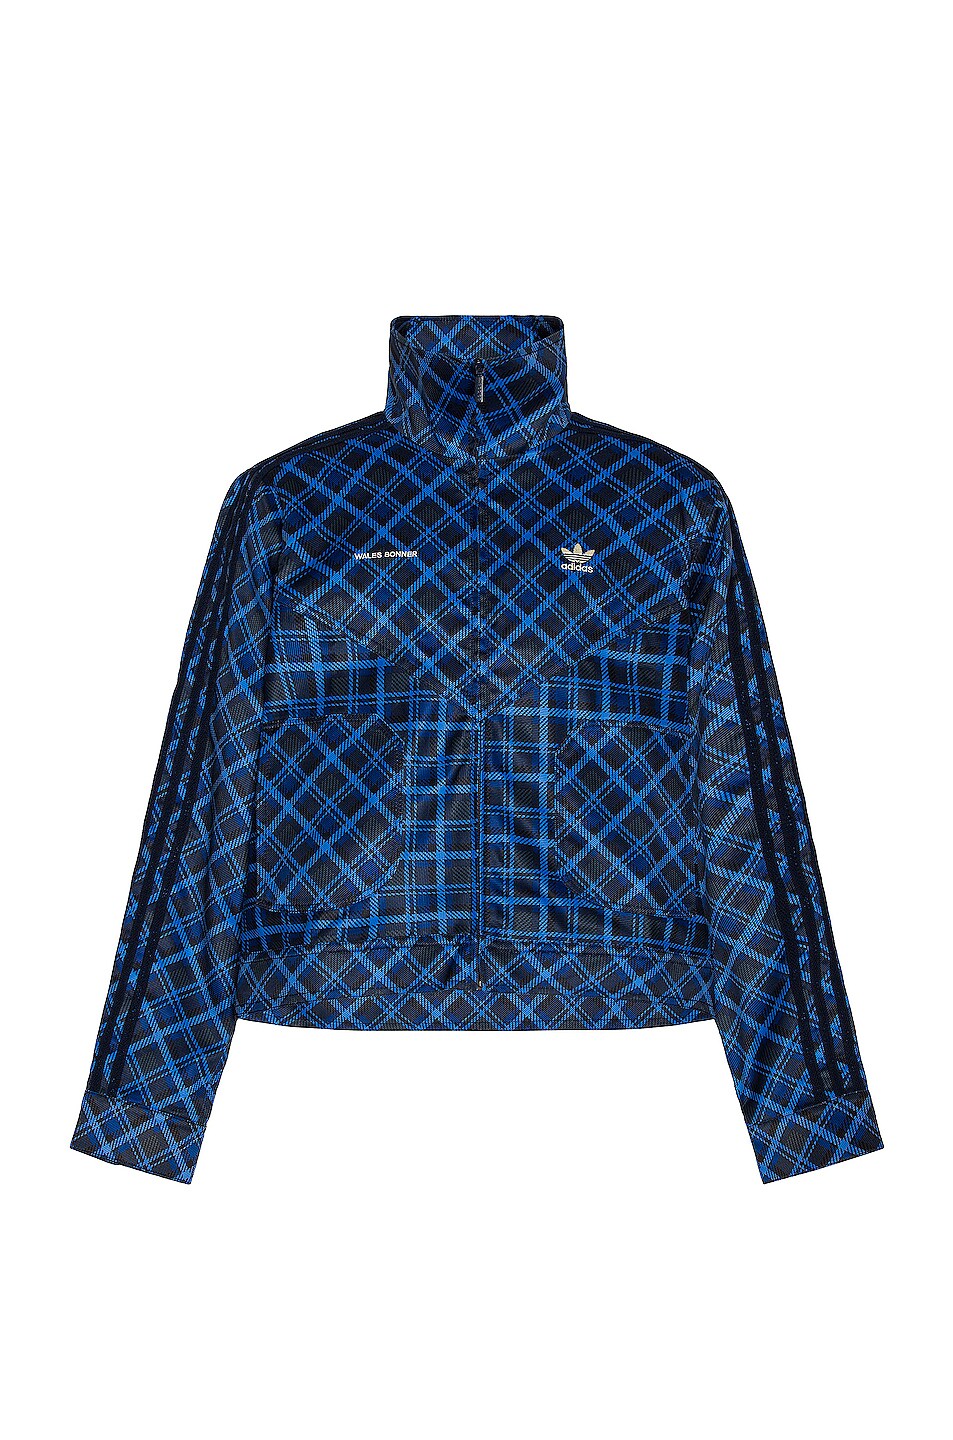 Image 1 of adidas by Wales Bonner Tartan Track Top in Blue